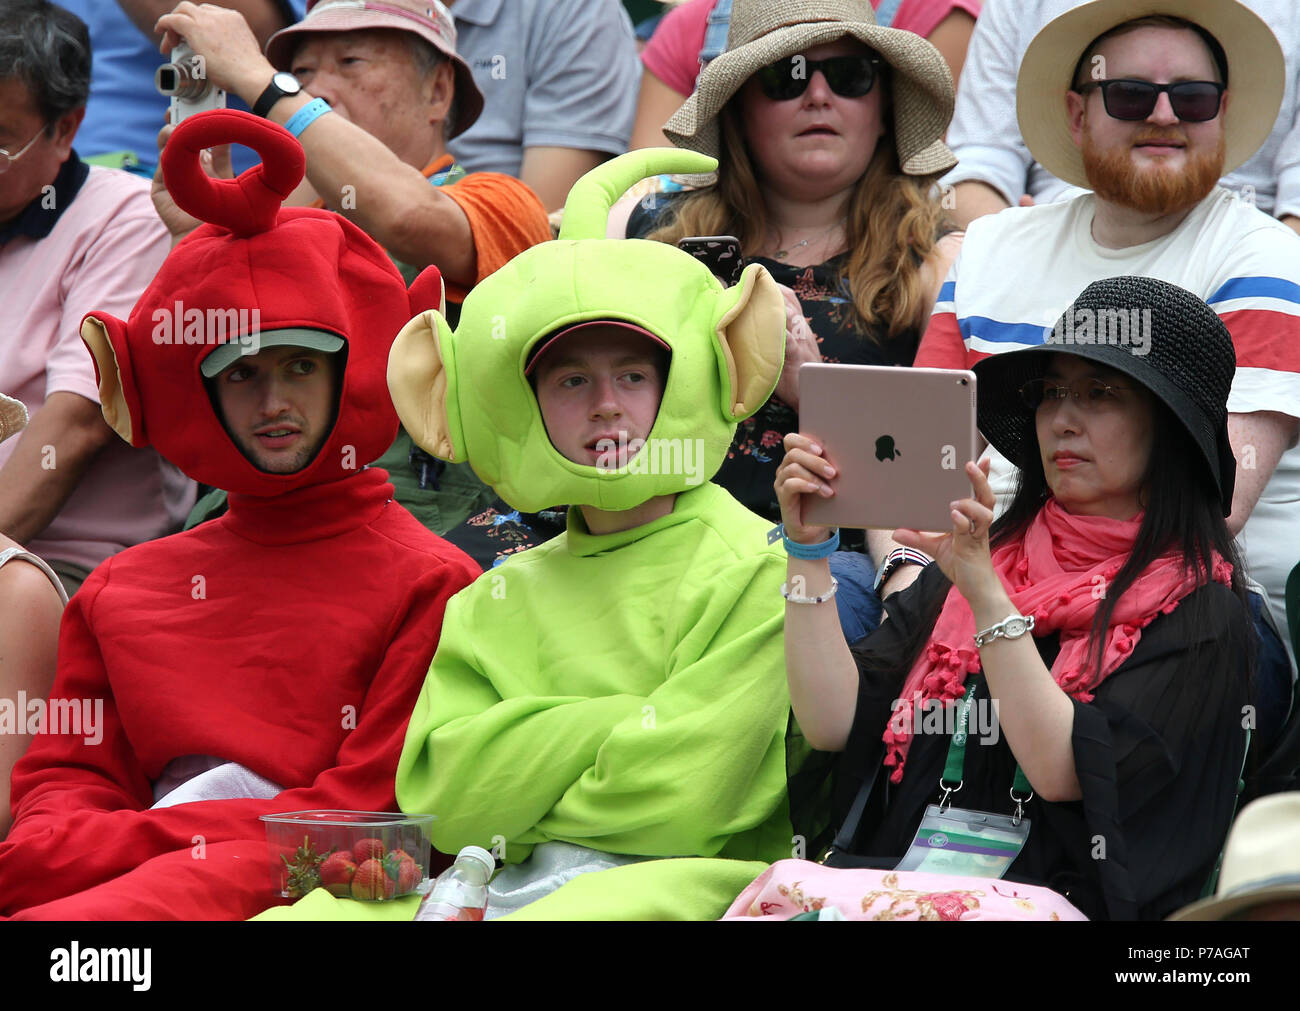 FANS DRESSED UP AS TELETUBBIES, THE WIMBLEDON CHAMPIONSHIPS 2018, THE WIMBLEDON CHAMPIONSHIPS 2018 THE ALL ENGLAND TENNIS CLUB, 2018 Stock Photo